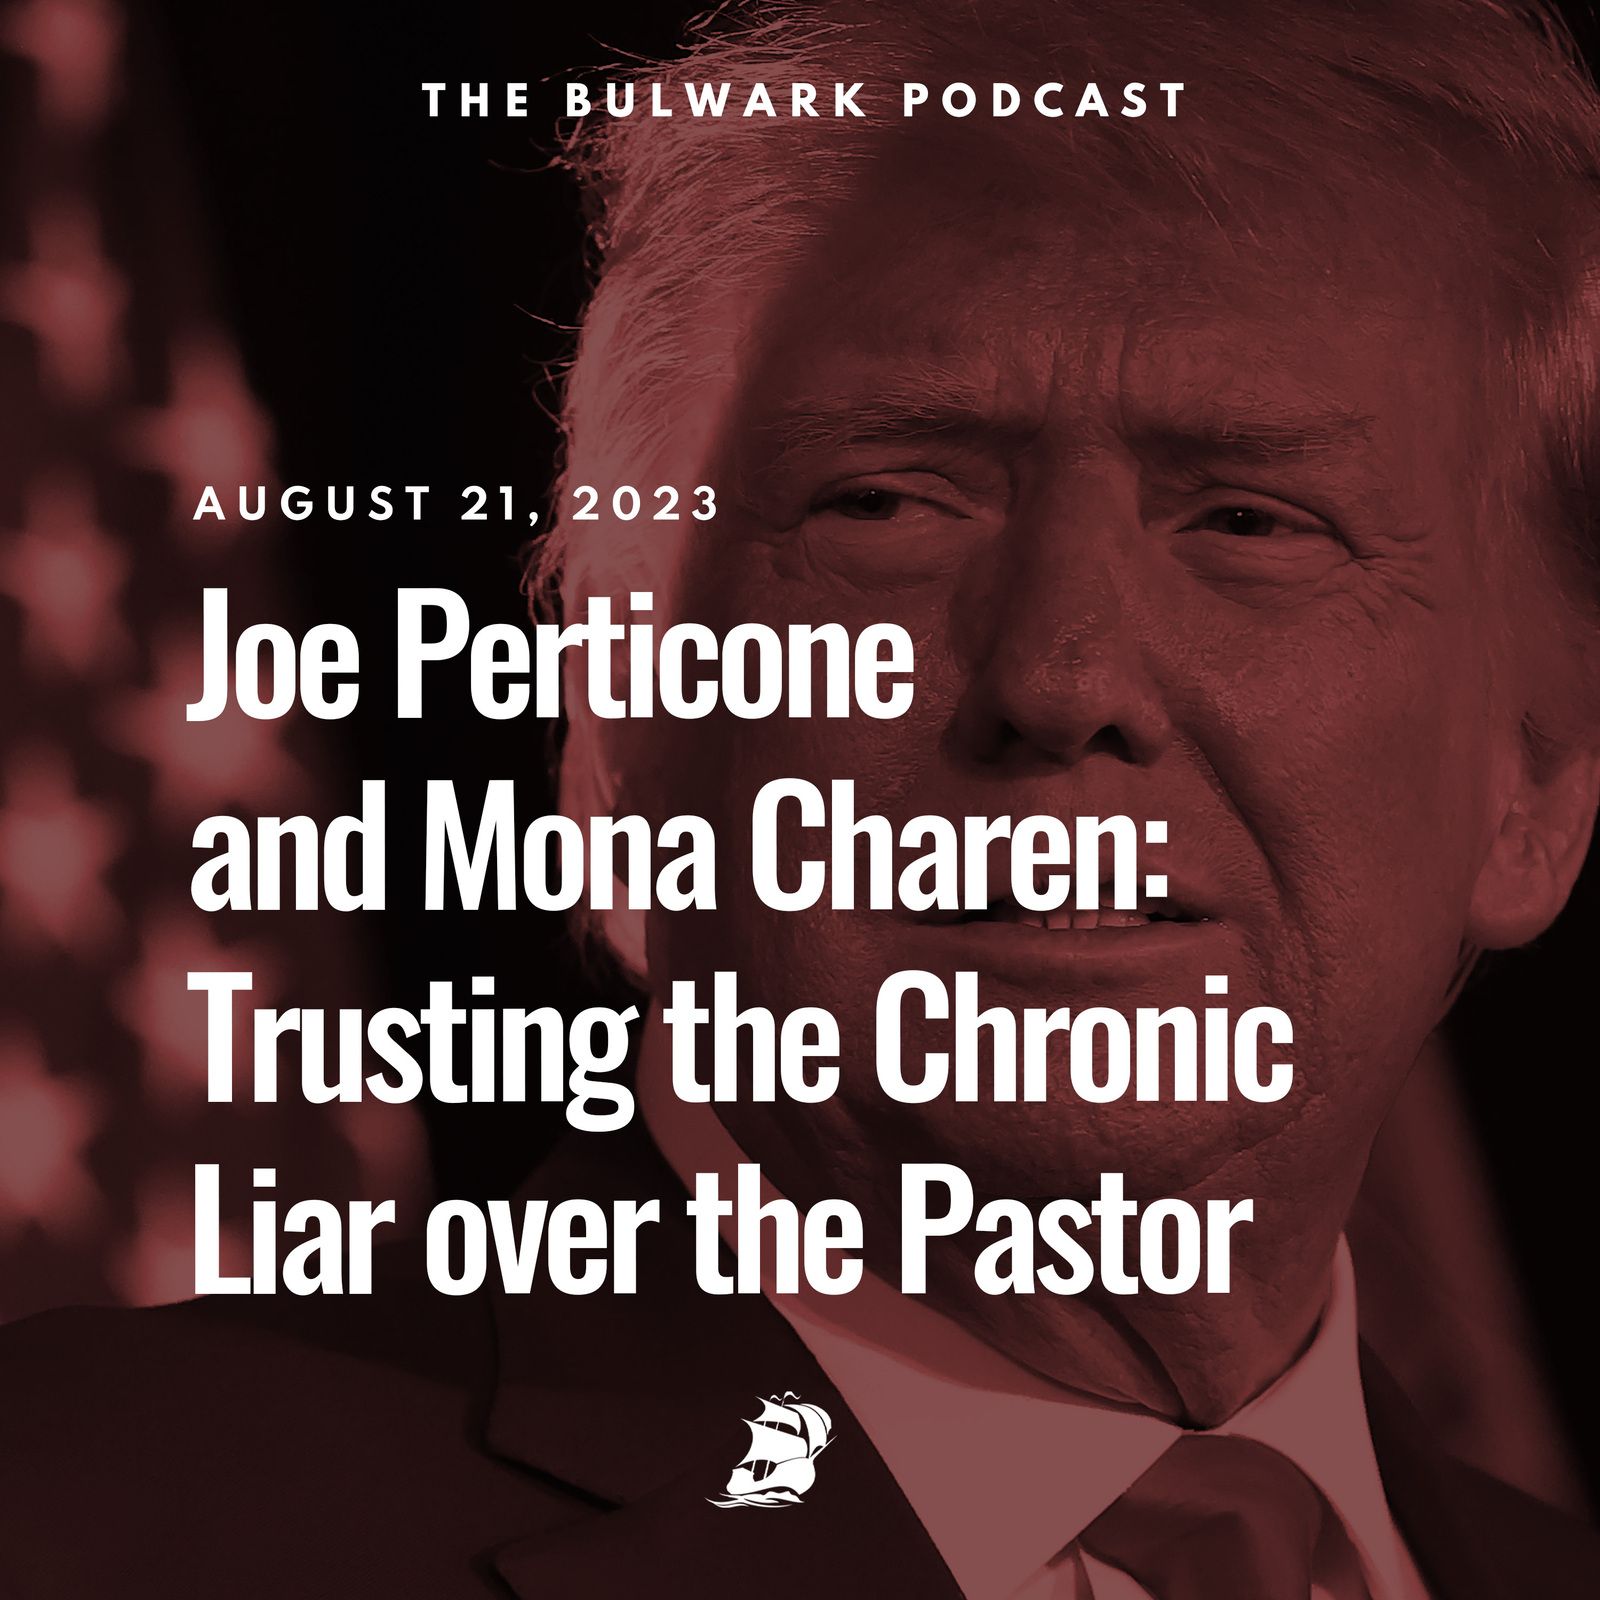 Joe Perticone and Mona Charen: Trusting the Chronic Liar over the Pastor